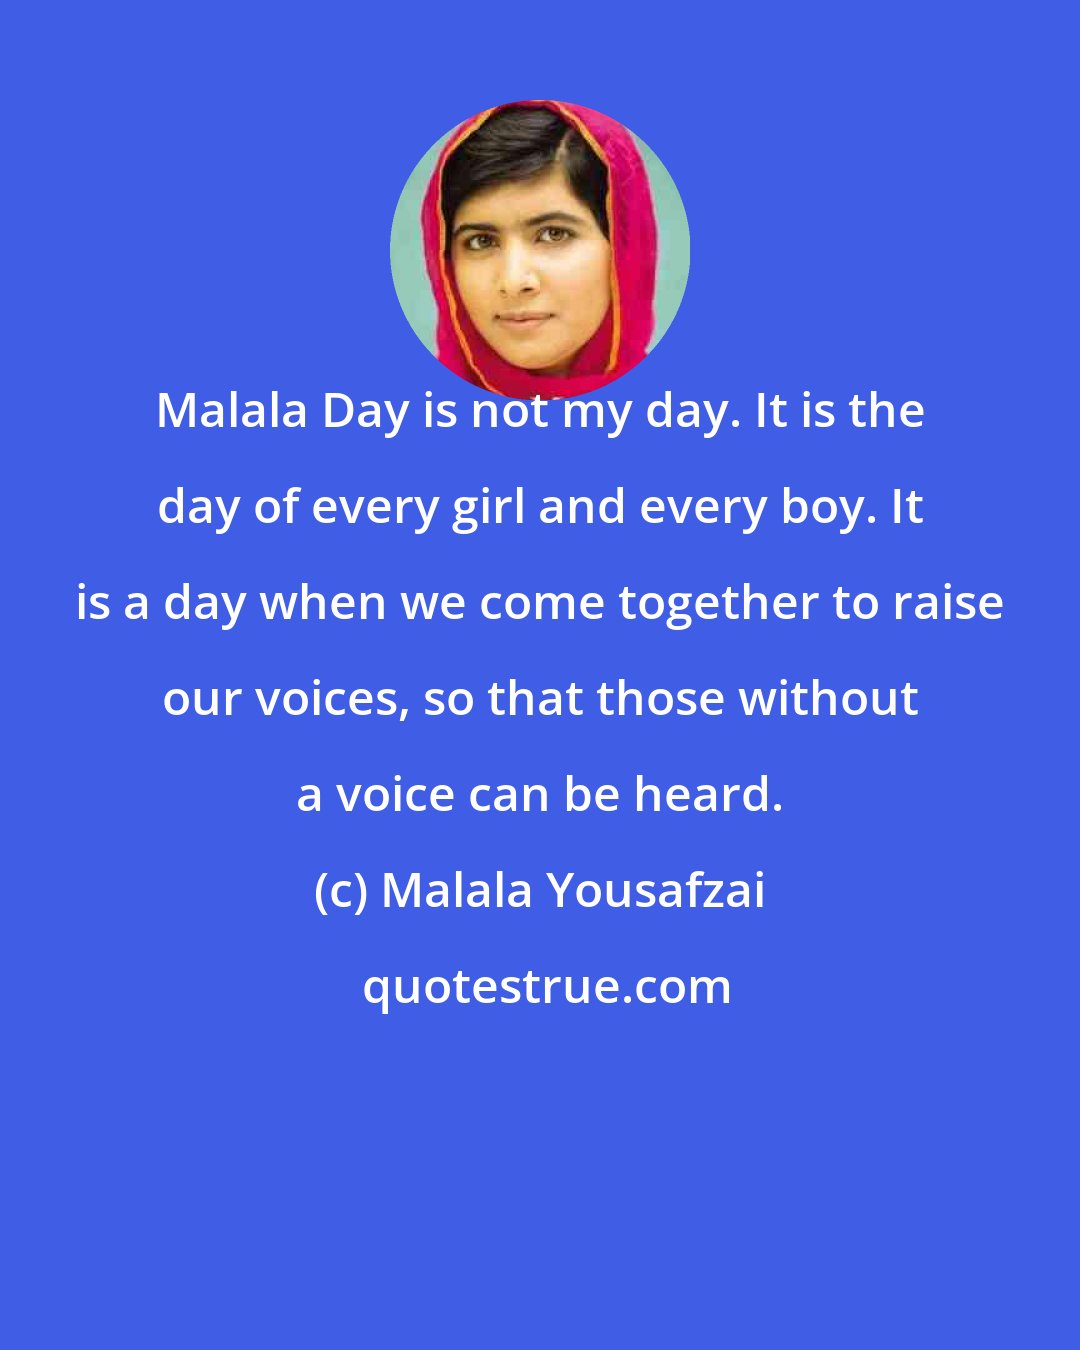 Malala Yousafzai: Malala Day is not my day. It is the day of every girl and every boy. It is a day when we come together to raise our voices, so that those without a voice can be heard.